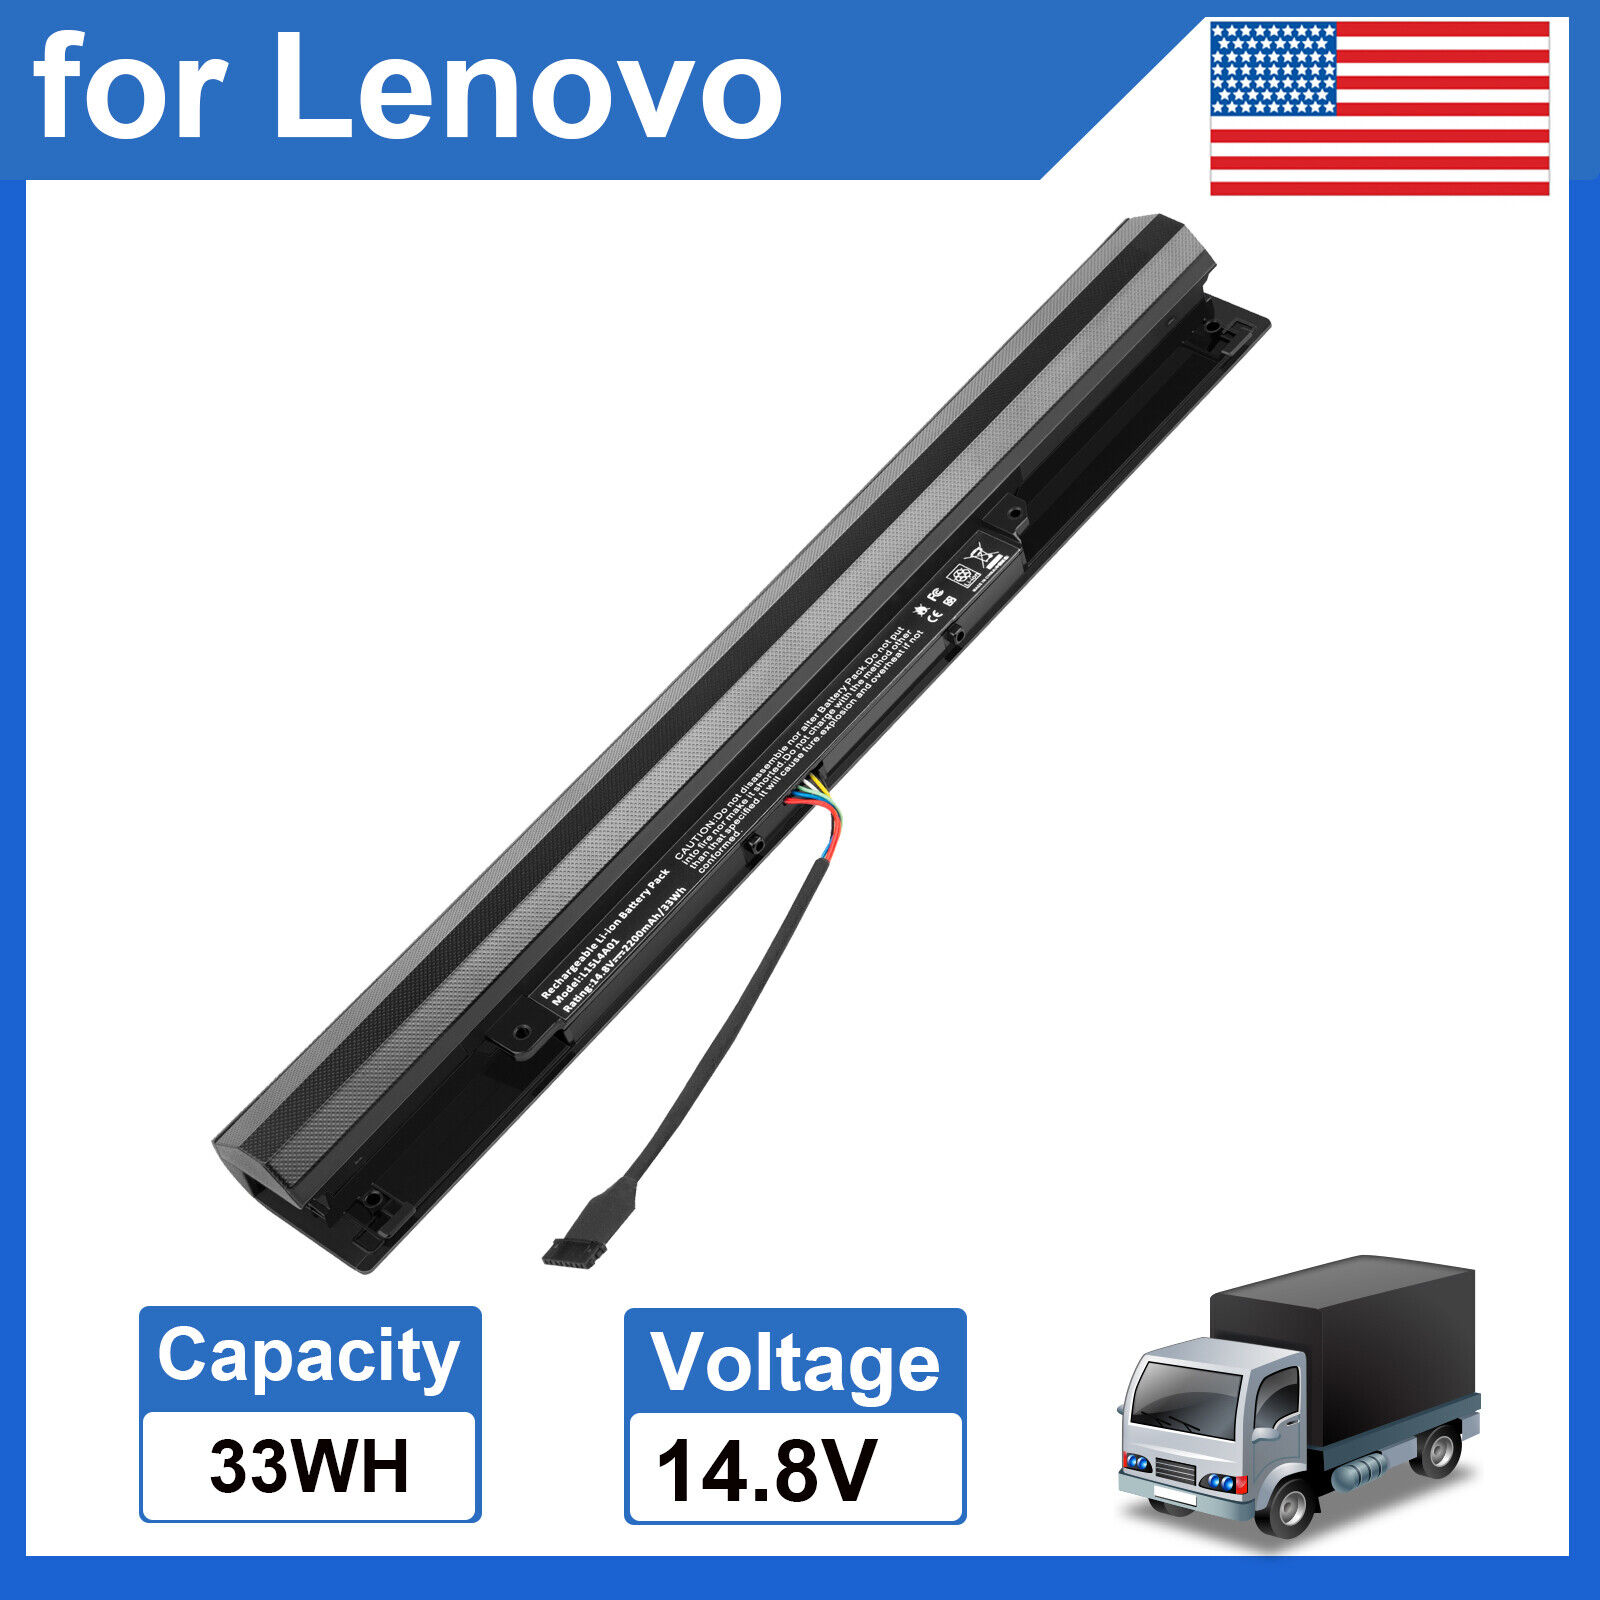 L15L4A01 L15S4A01 Spare Laptop Battery for Lenovo IdeaPad 300-15IBR 300-15ISK